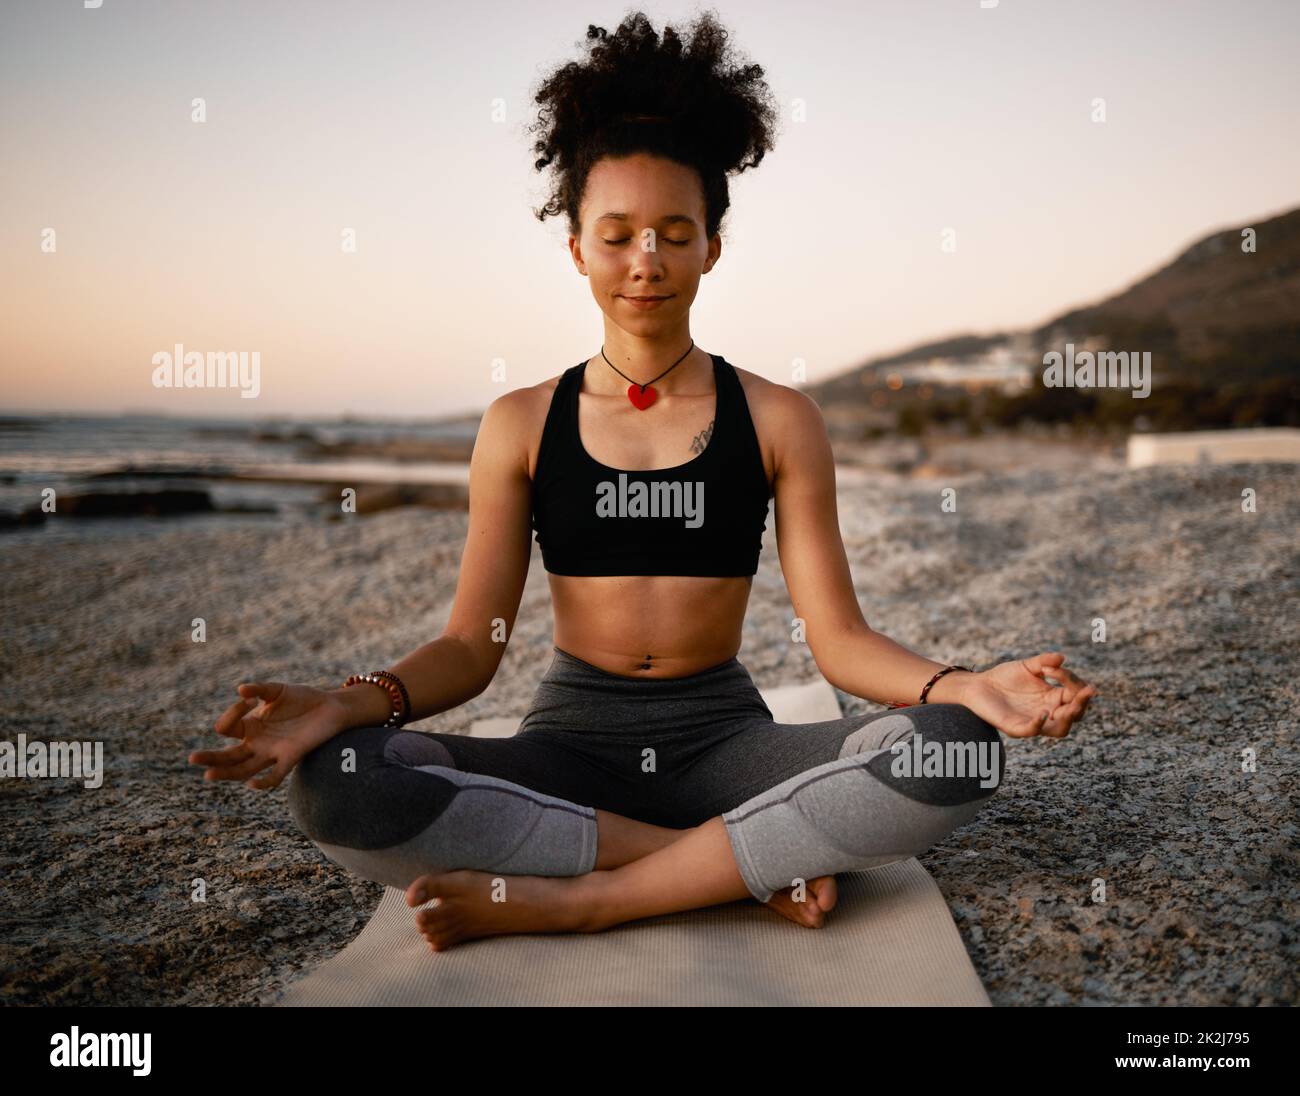 Ultimate zen. Full length shot of an attractive young woman practicing yoga on the beach at sunset. Stock Photo